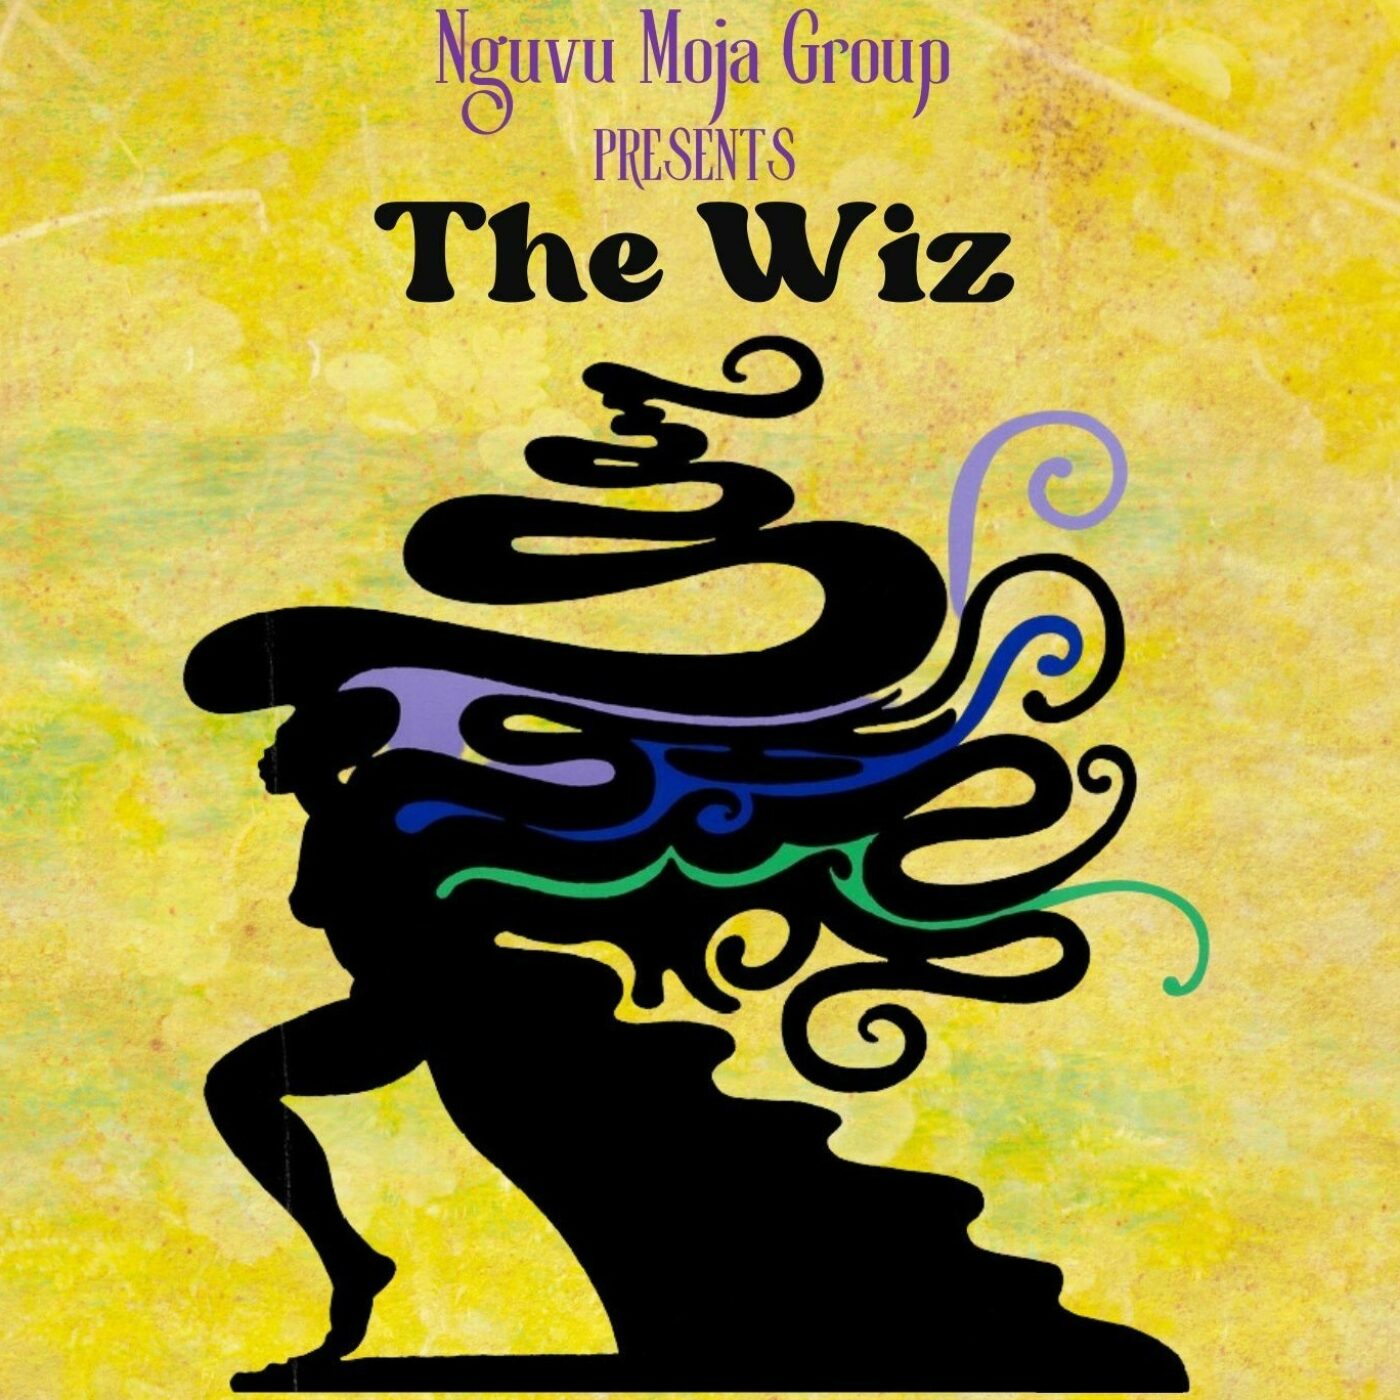 the wiz movie poster